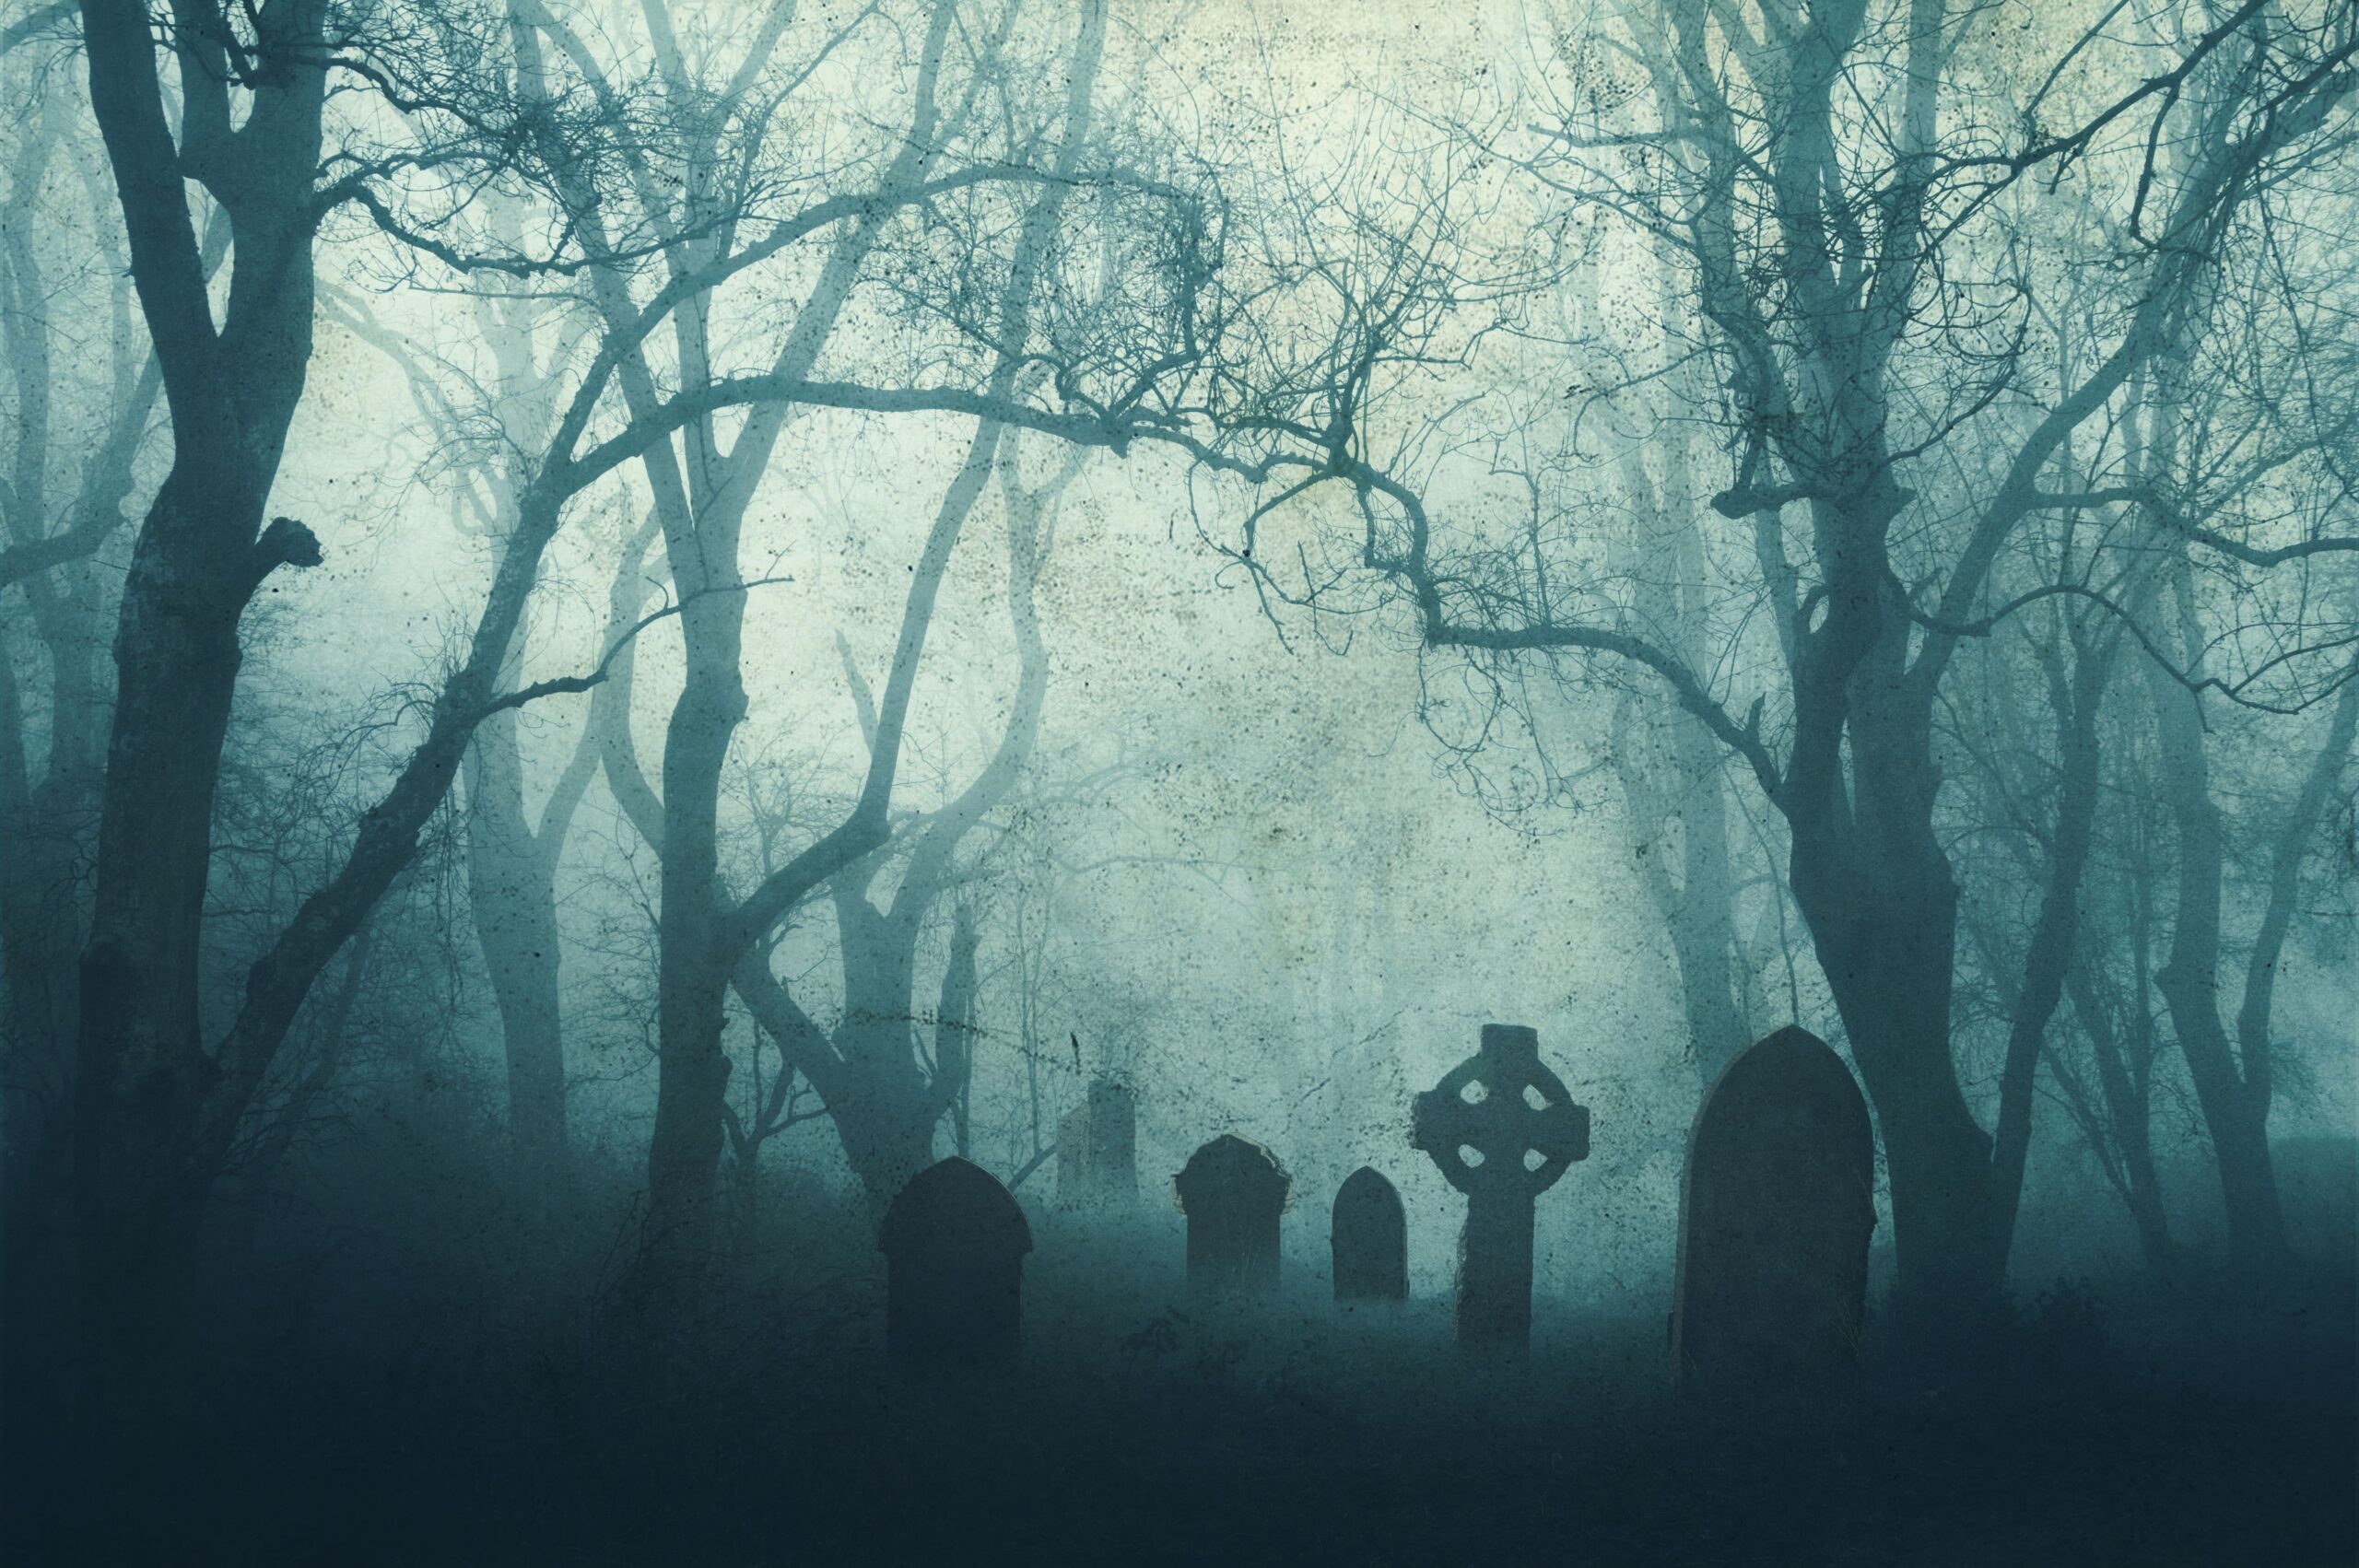 Graveyard in a scary forest in winter, with the trees silhouetted by fog. (David Wall/Moment via Getty Images)